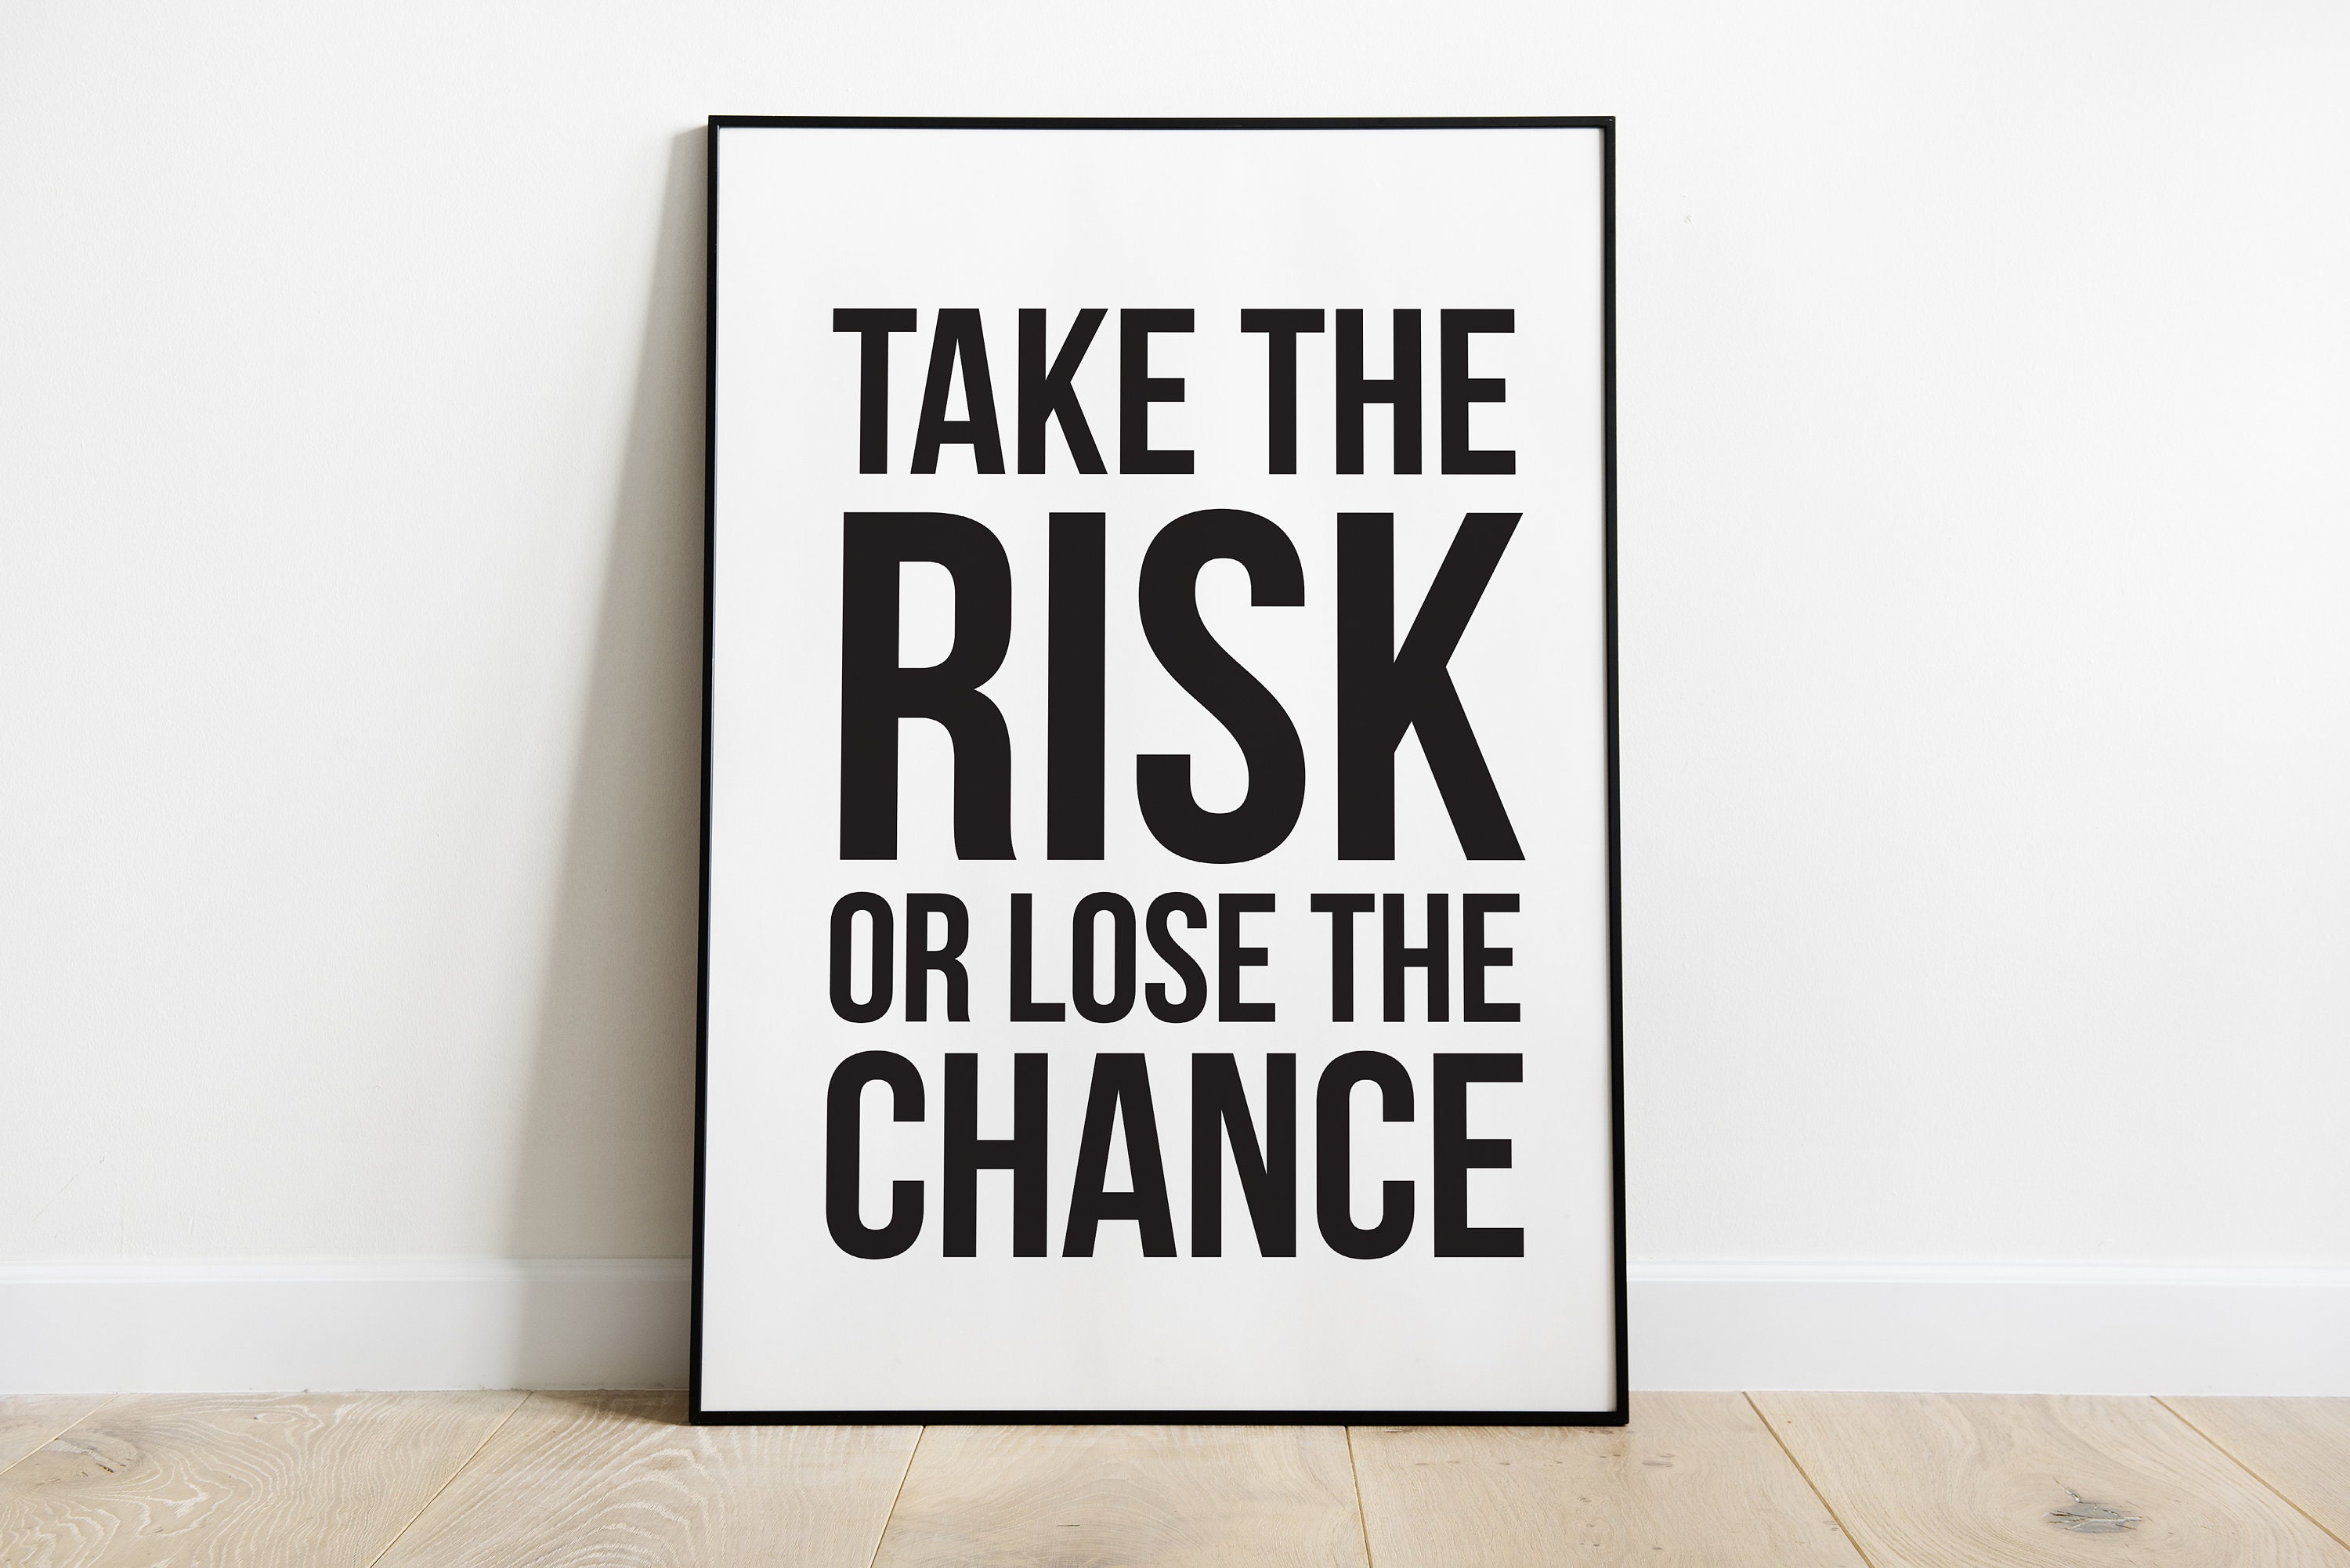 Take The Risk Or Lose The Chance large quote wall art | Etsy